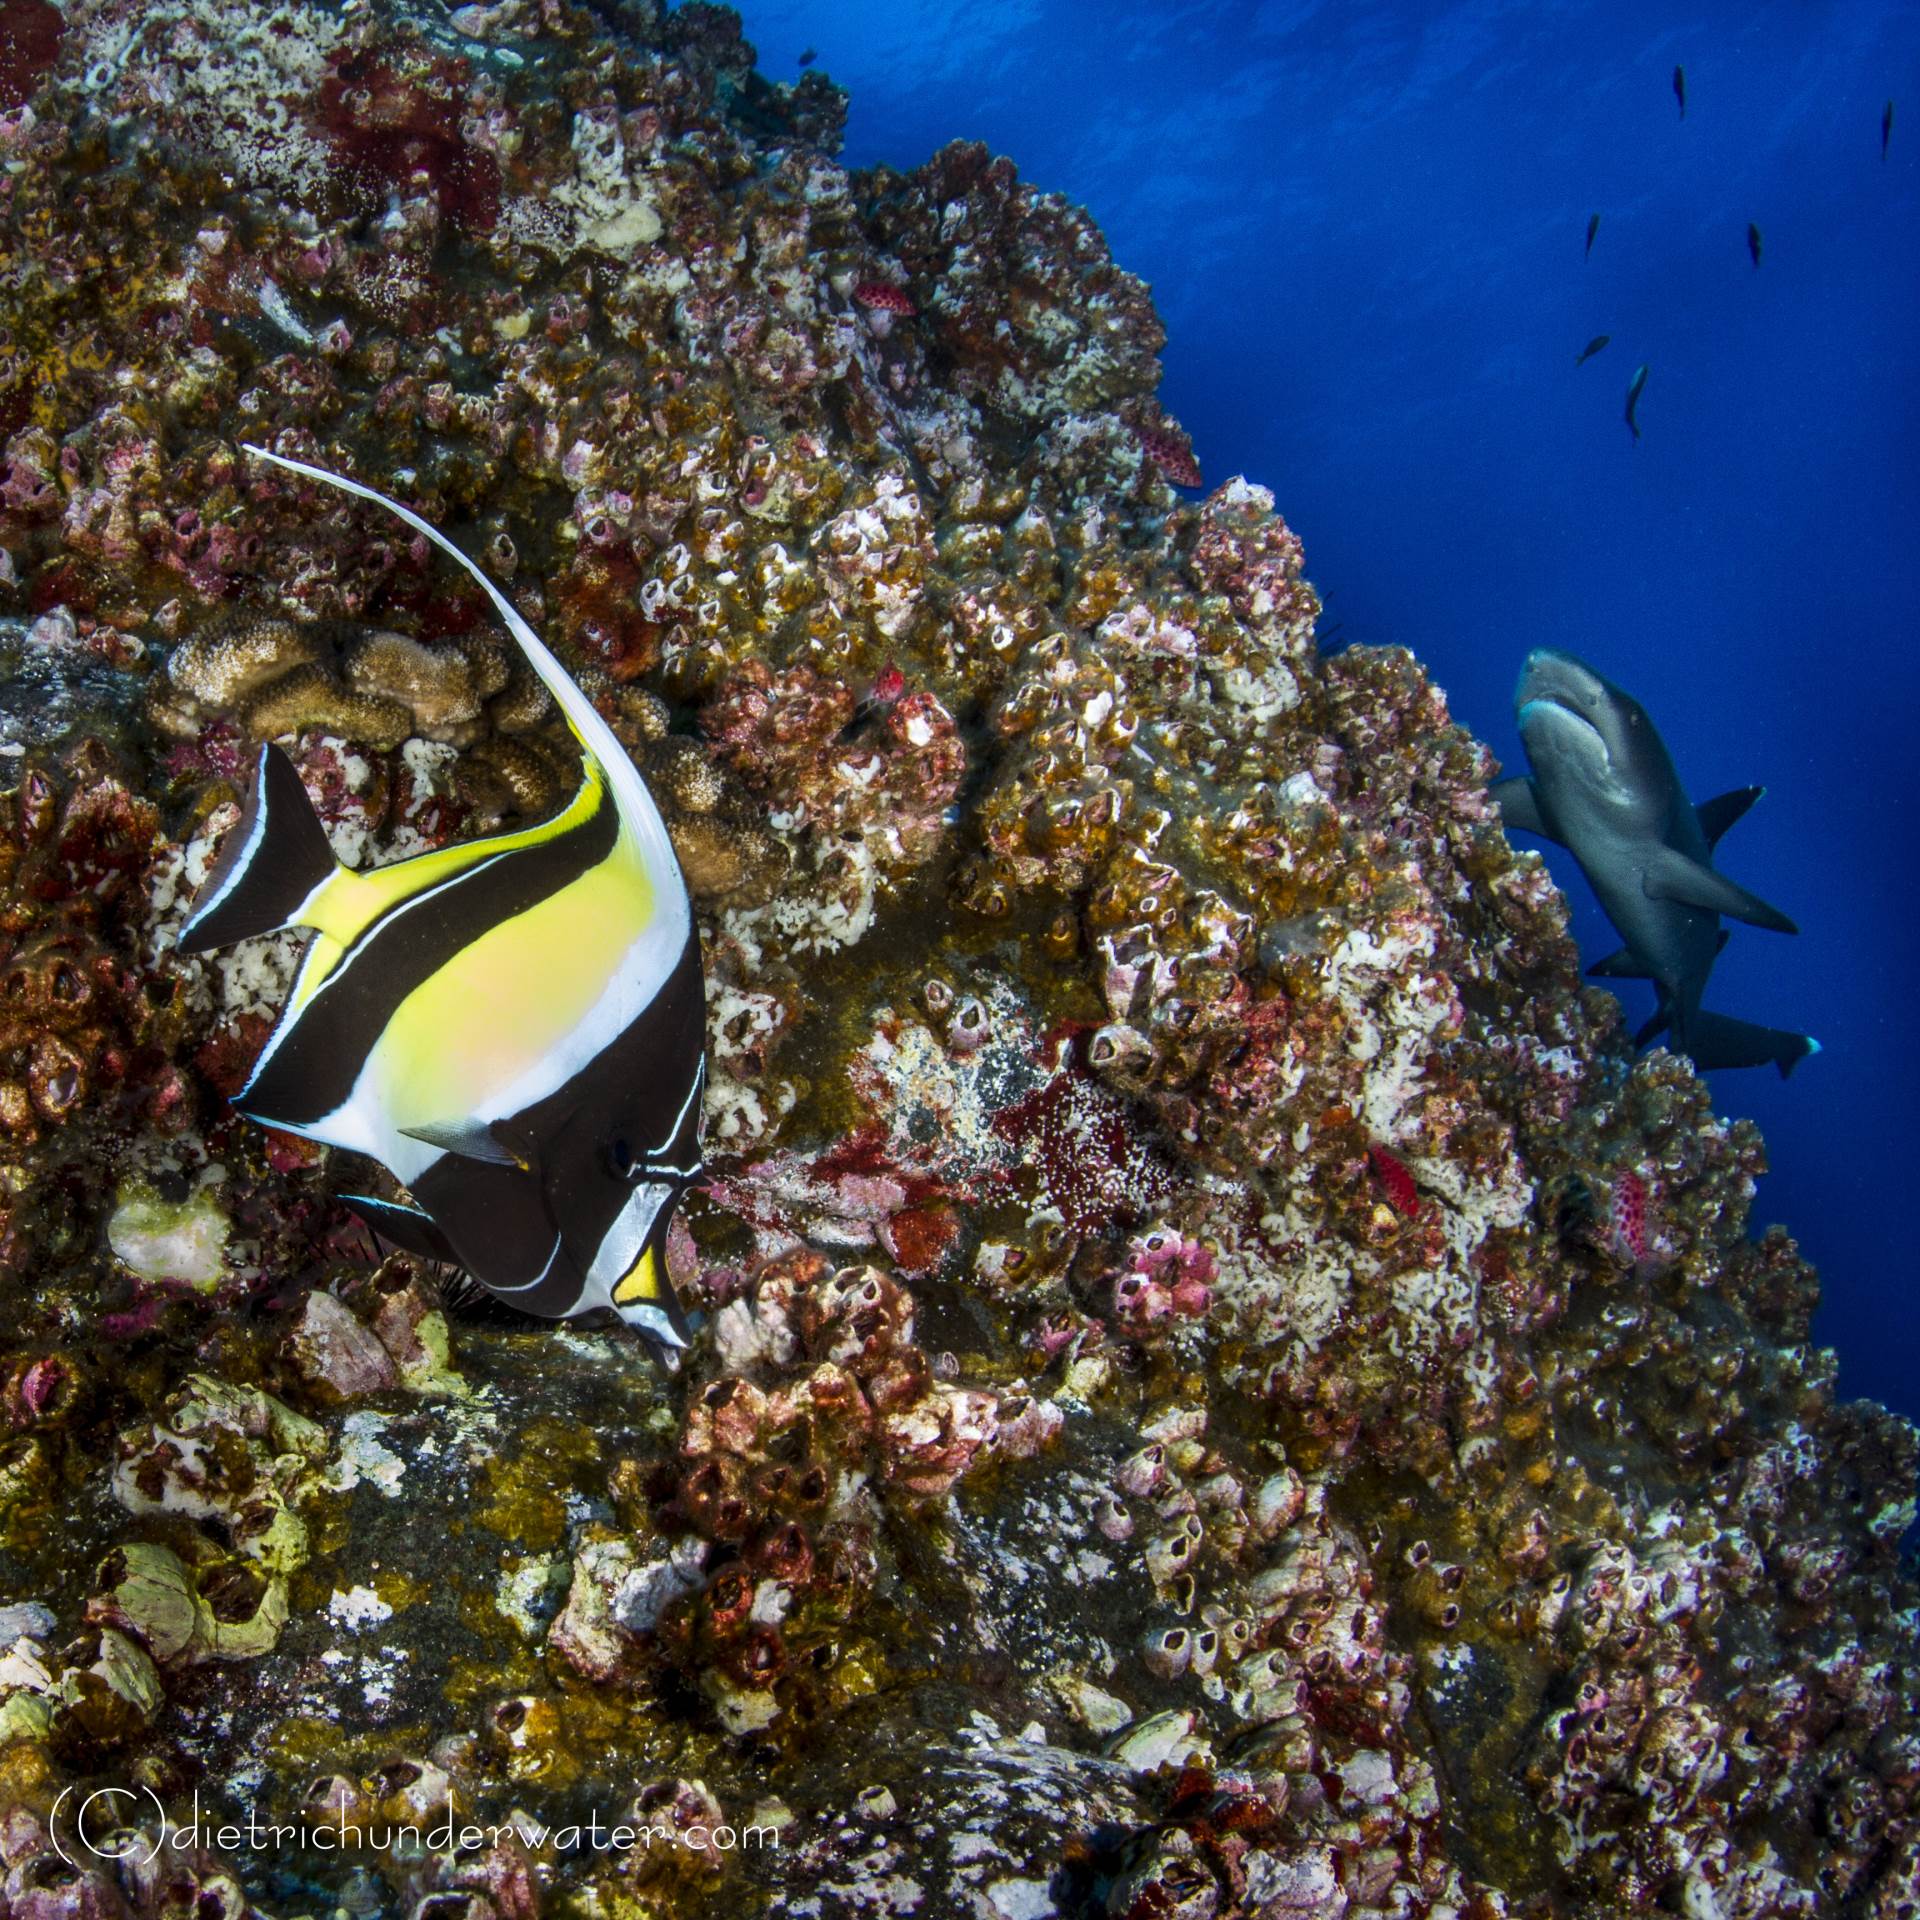 Beauty & the Beast:  a great image of a Moorish Idol and Whitetip shark against a beautiful reef.